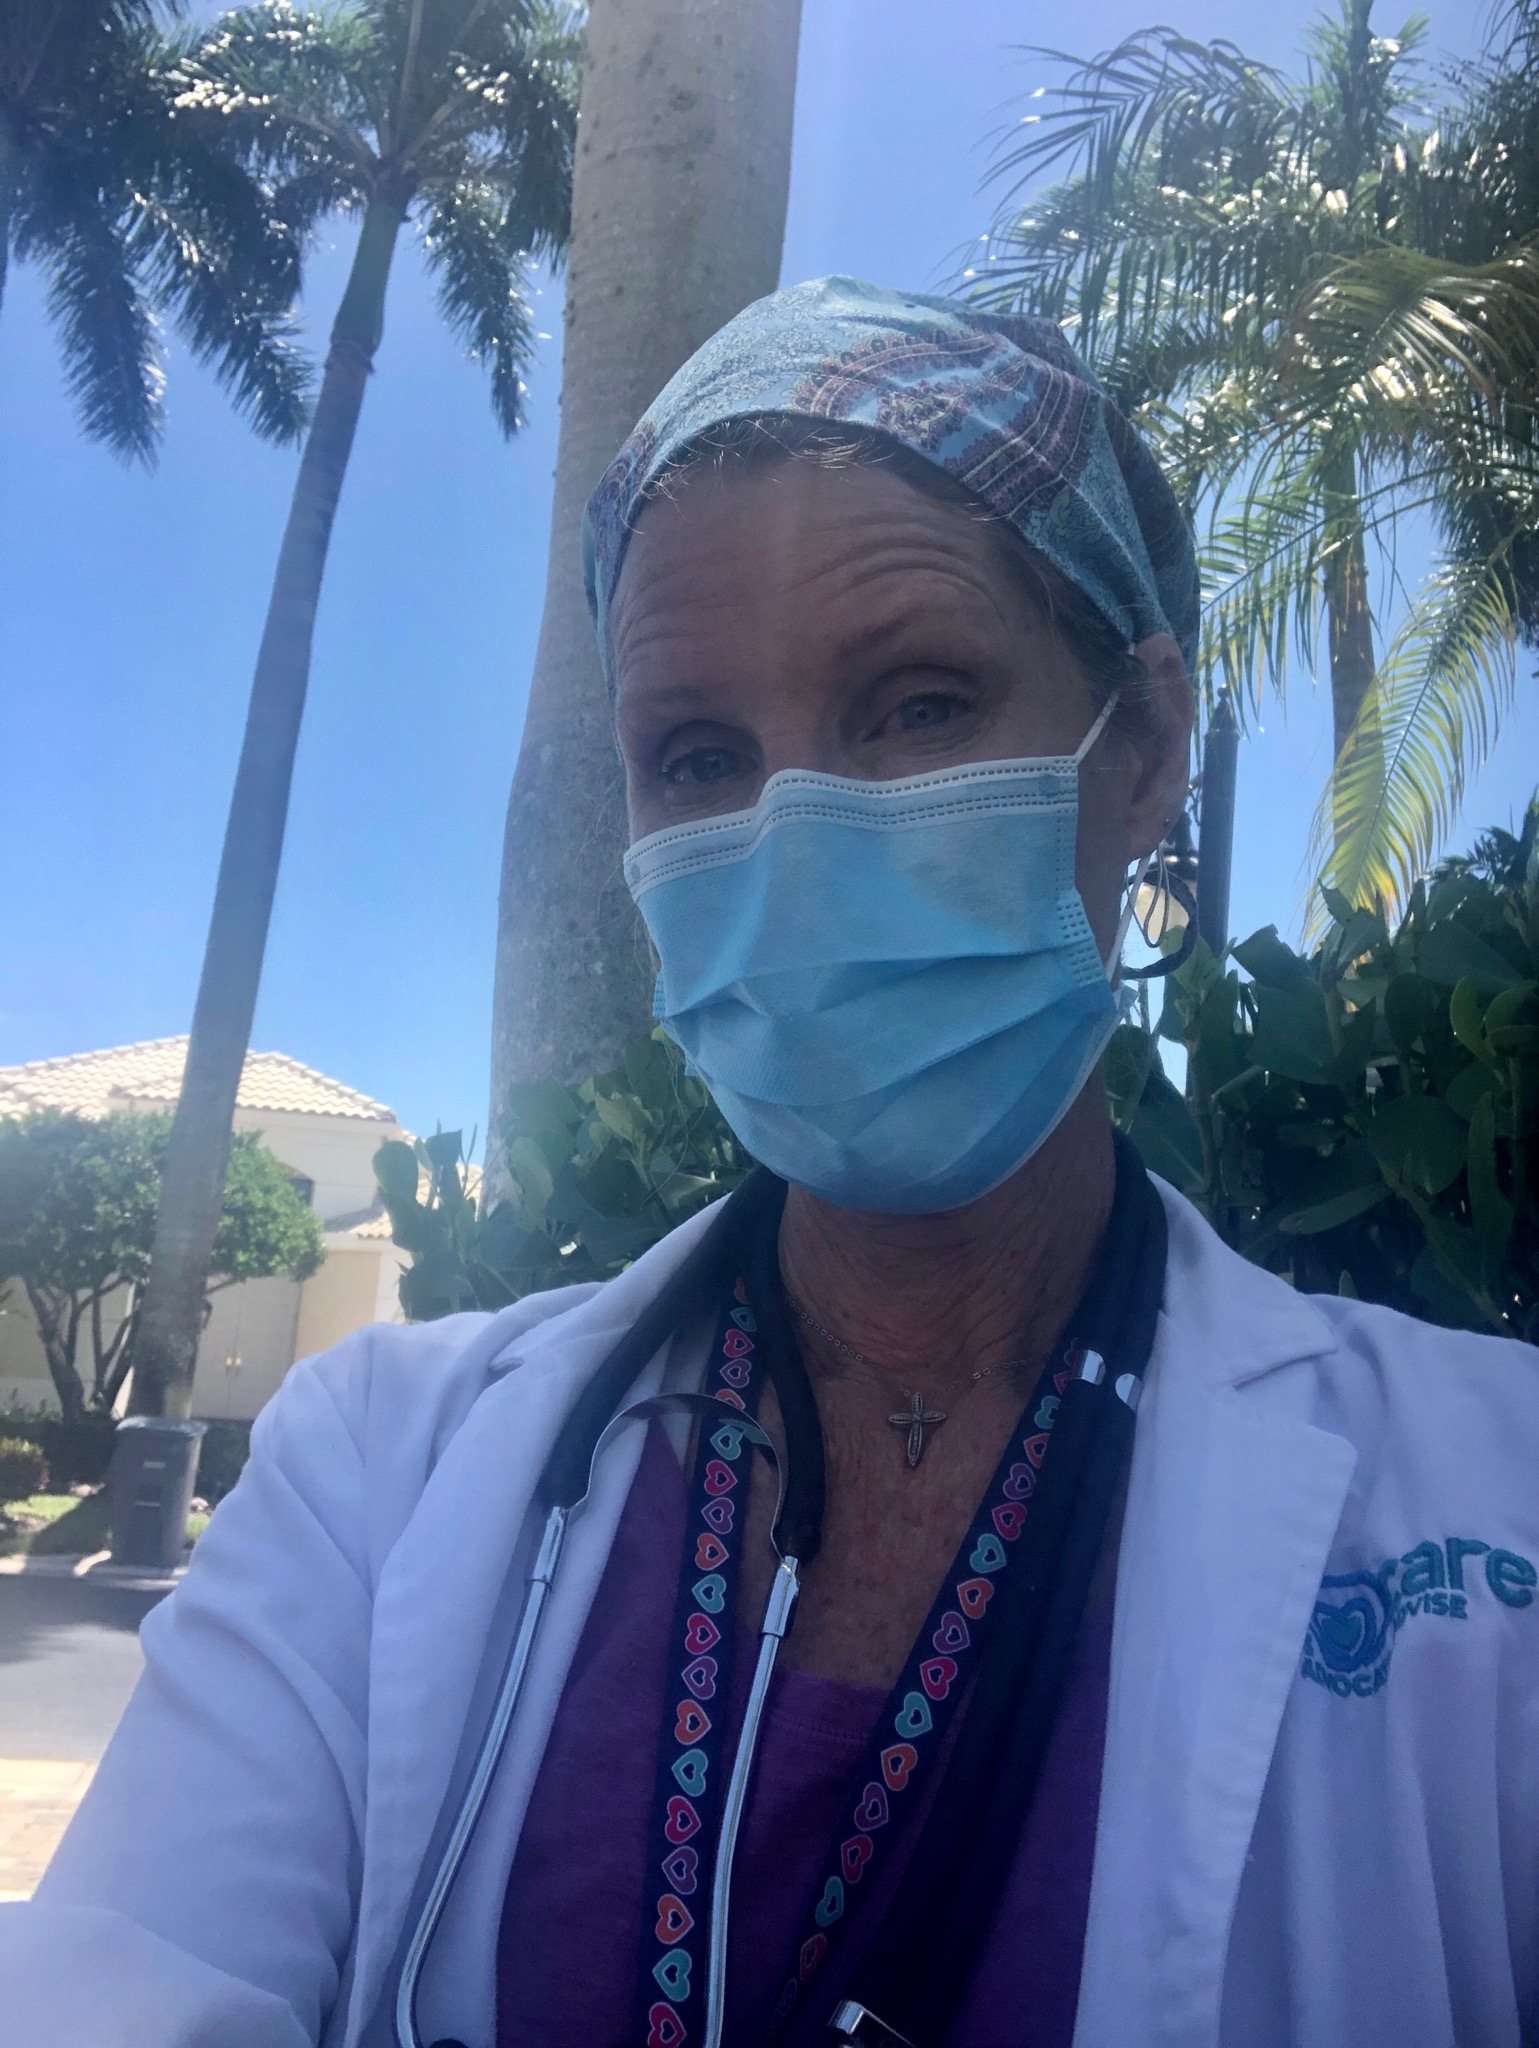 female doctor taking selfie by wearing mask and setscope on her neck